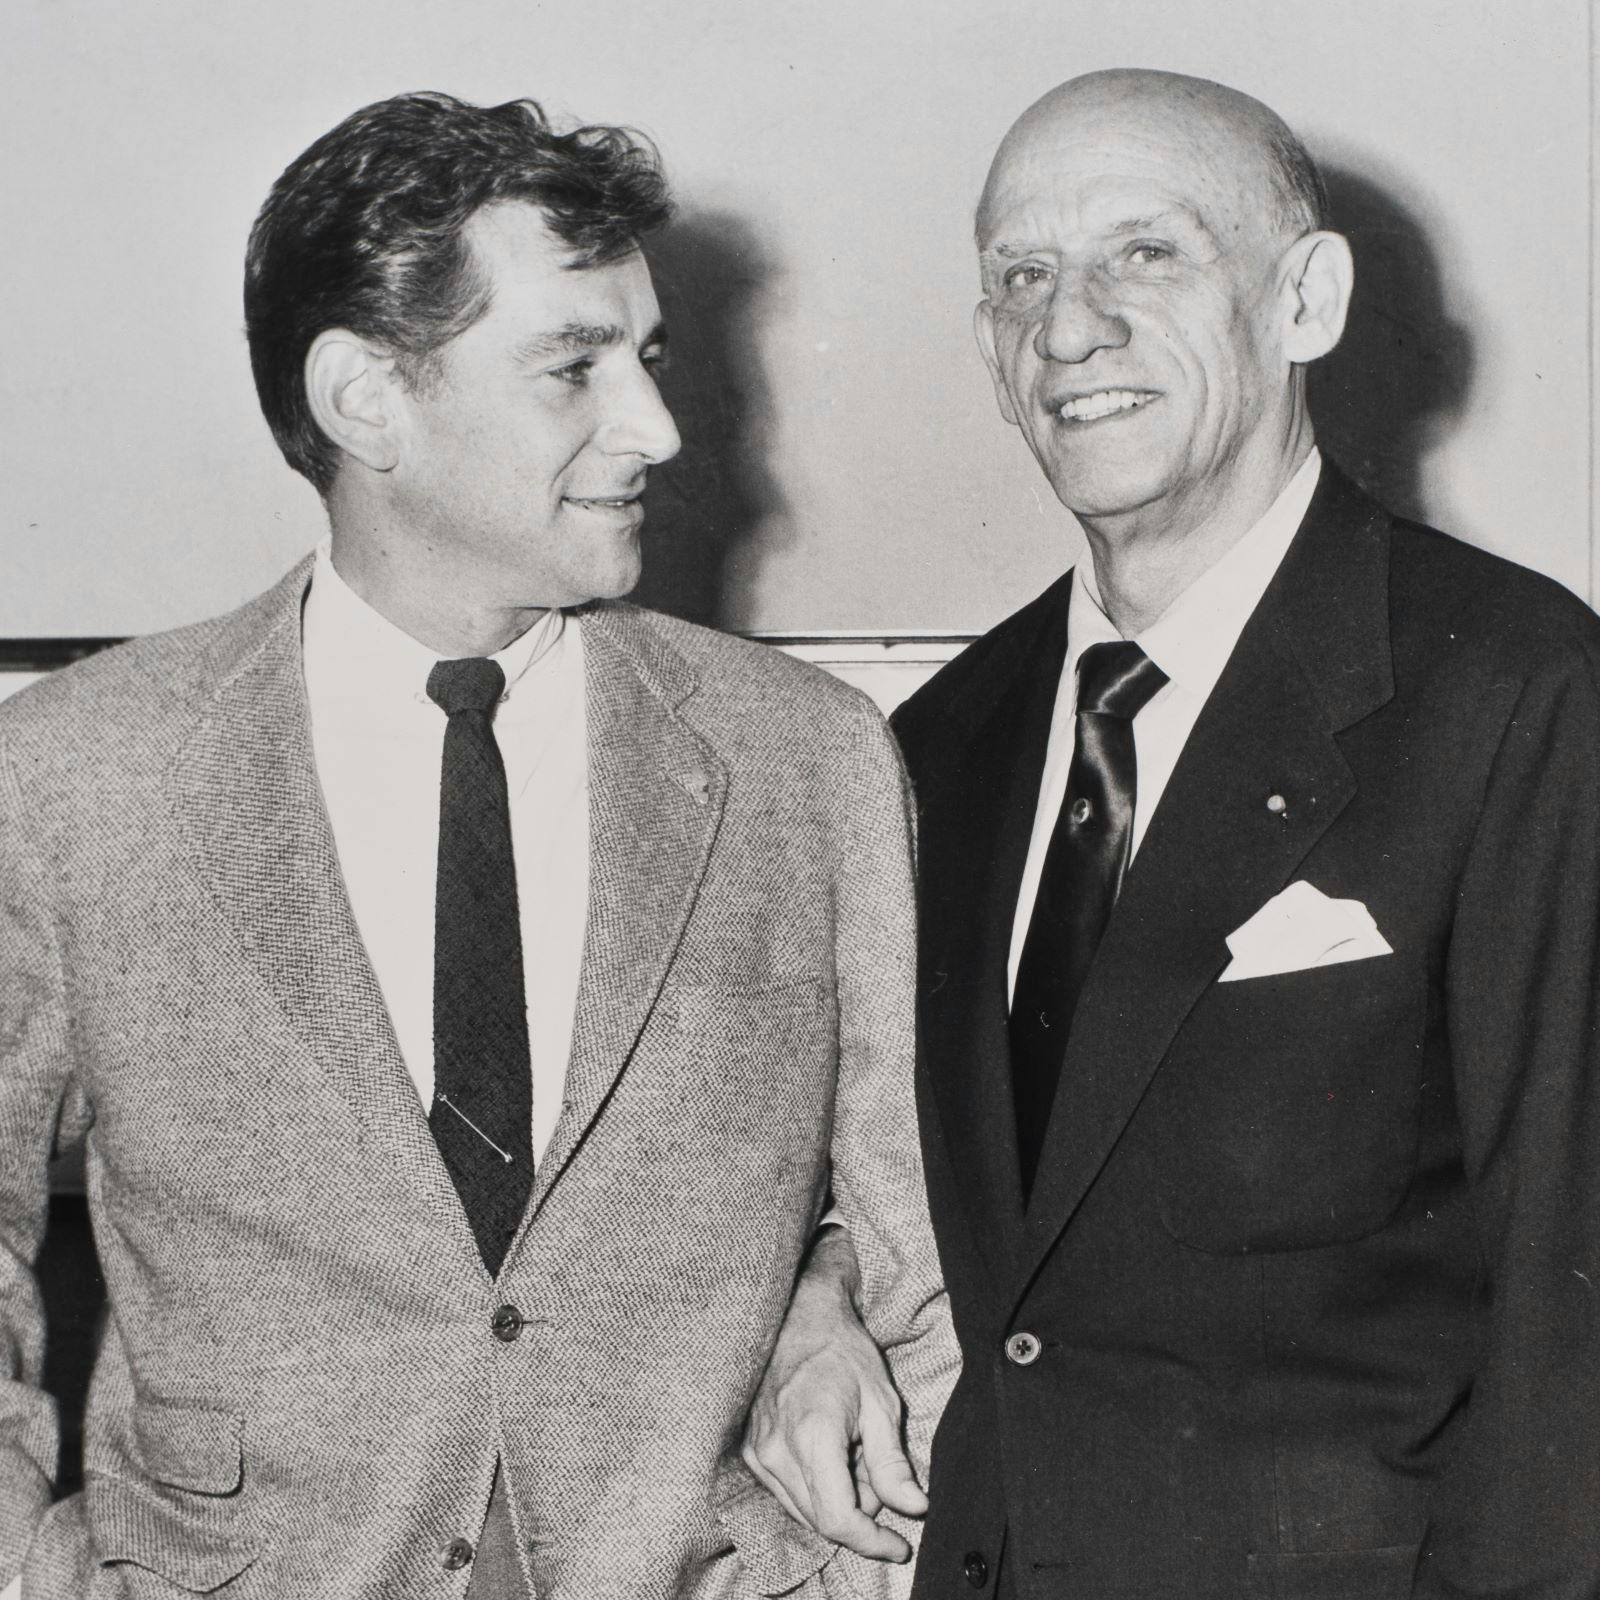 Did union rules prevent Leonard Bernstein from joining the Minnesota Orchestra?